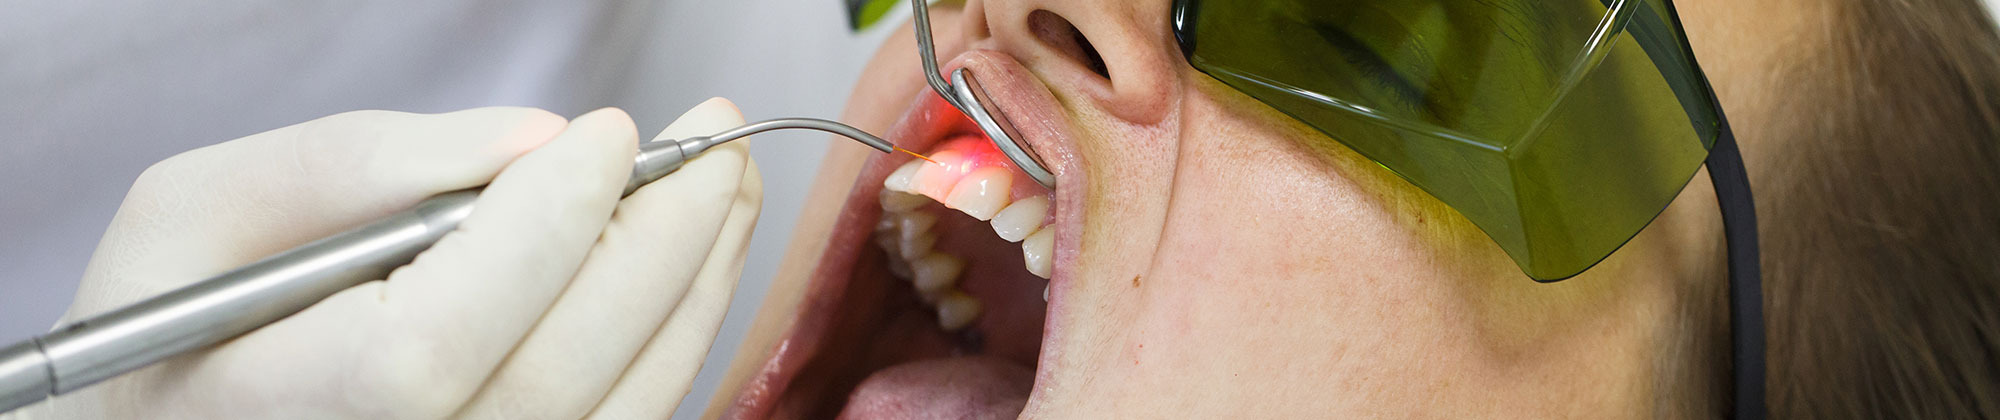 Person undergoing laser dentistry therapy